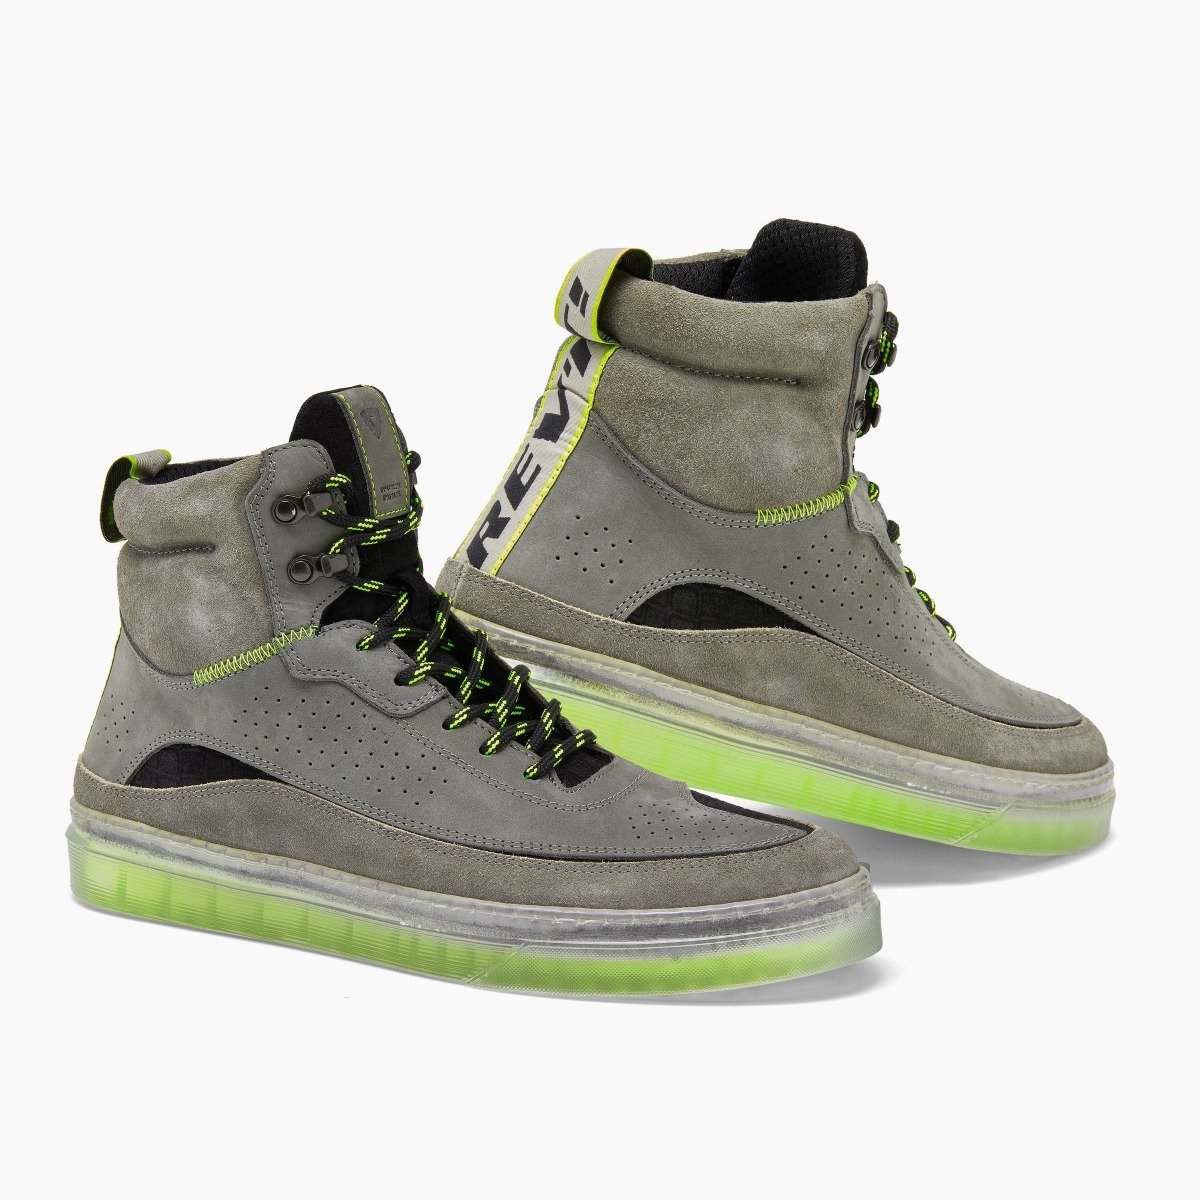 Image of REV'IT! Filter Gray Neon Yellow Motorcycle Shoes Size 47 EN